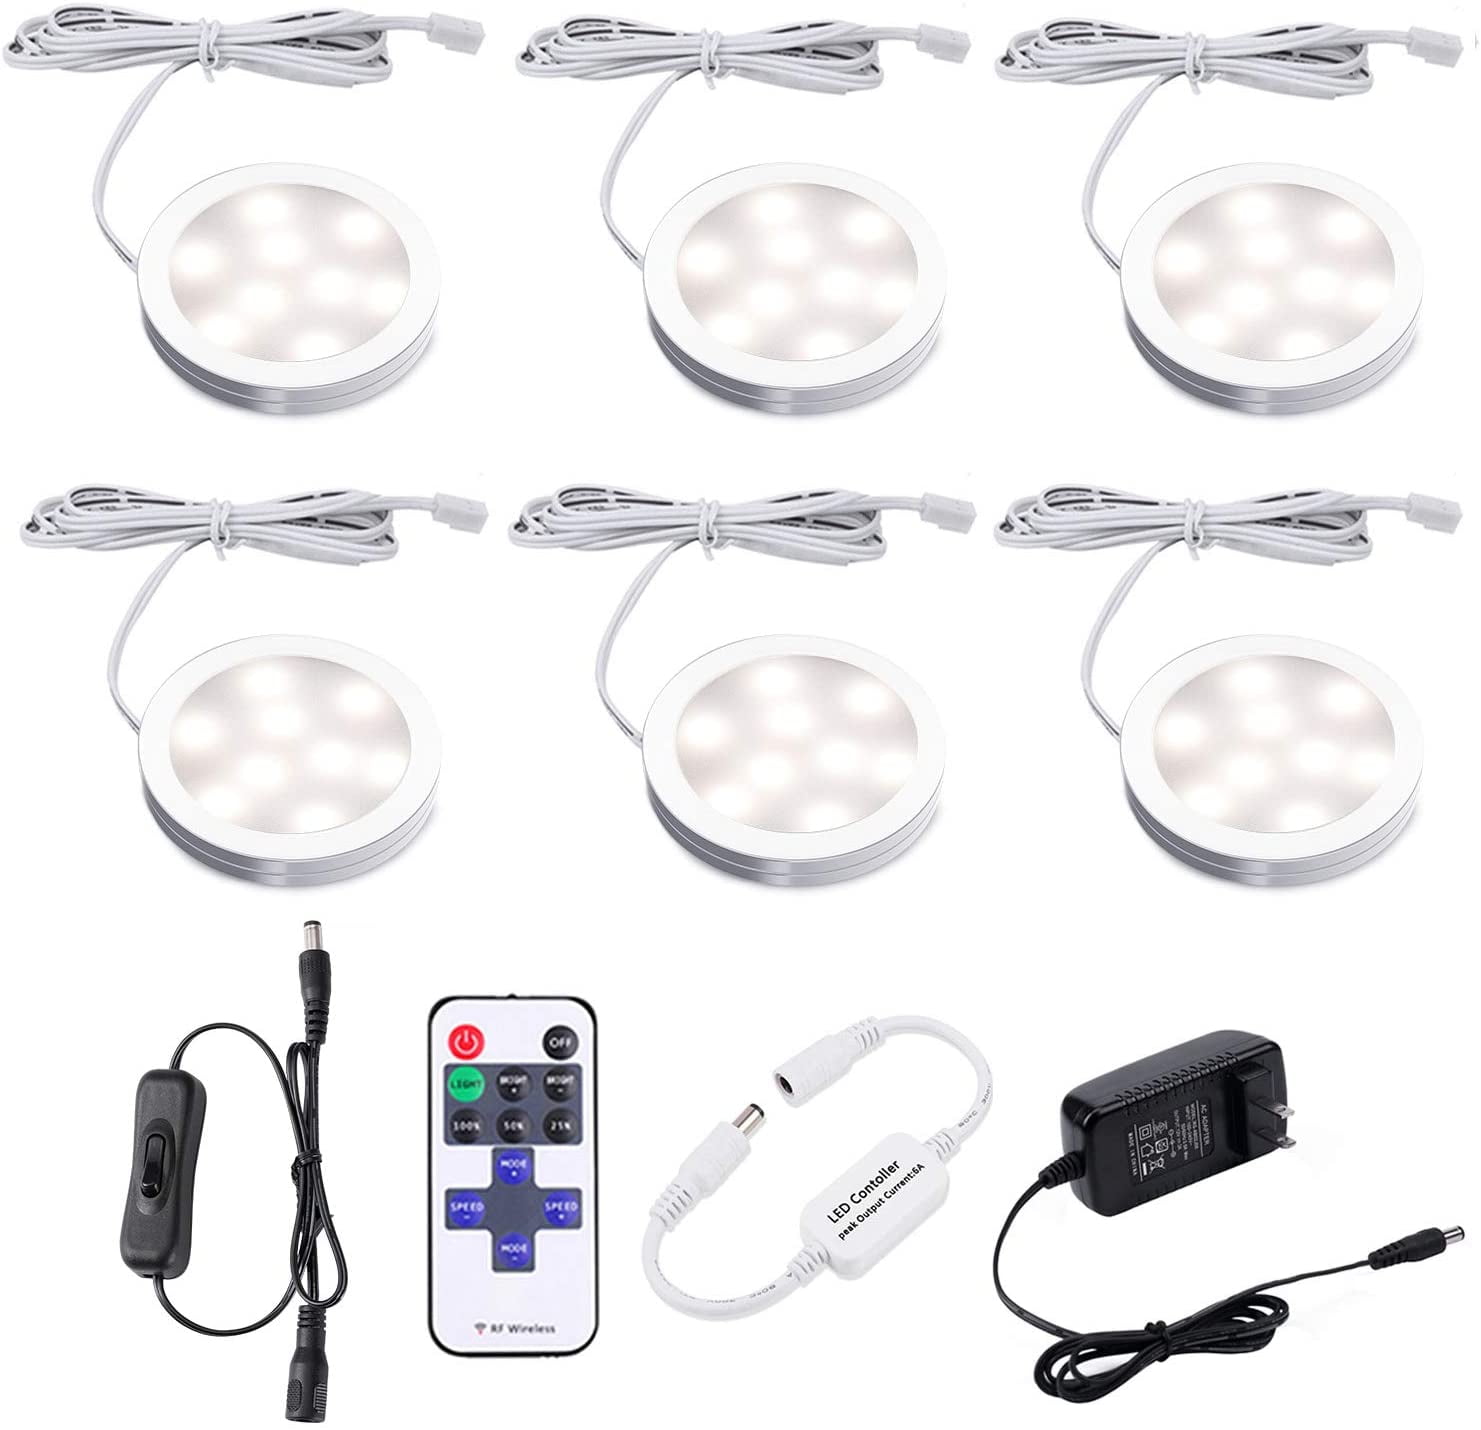 6000K Daylight White AIBOO 12V LED Under Cabinet Lights Kit 6 Pack Black Cord Aluminum Puck Lamps for Kitchen Counter Closet Lighting with Manual on/Off Switch 12W 6 Lights